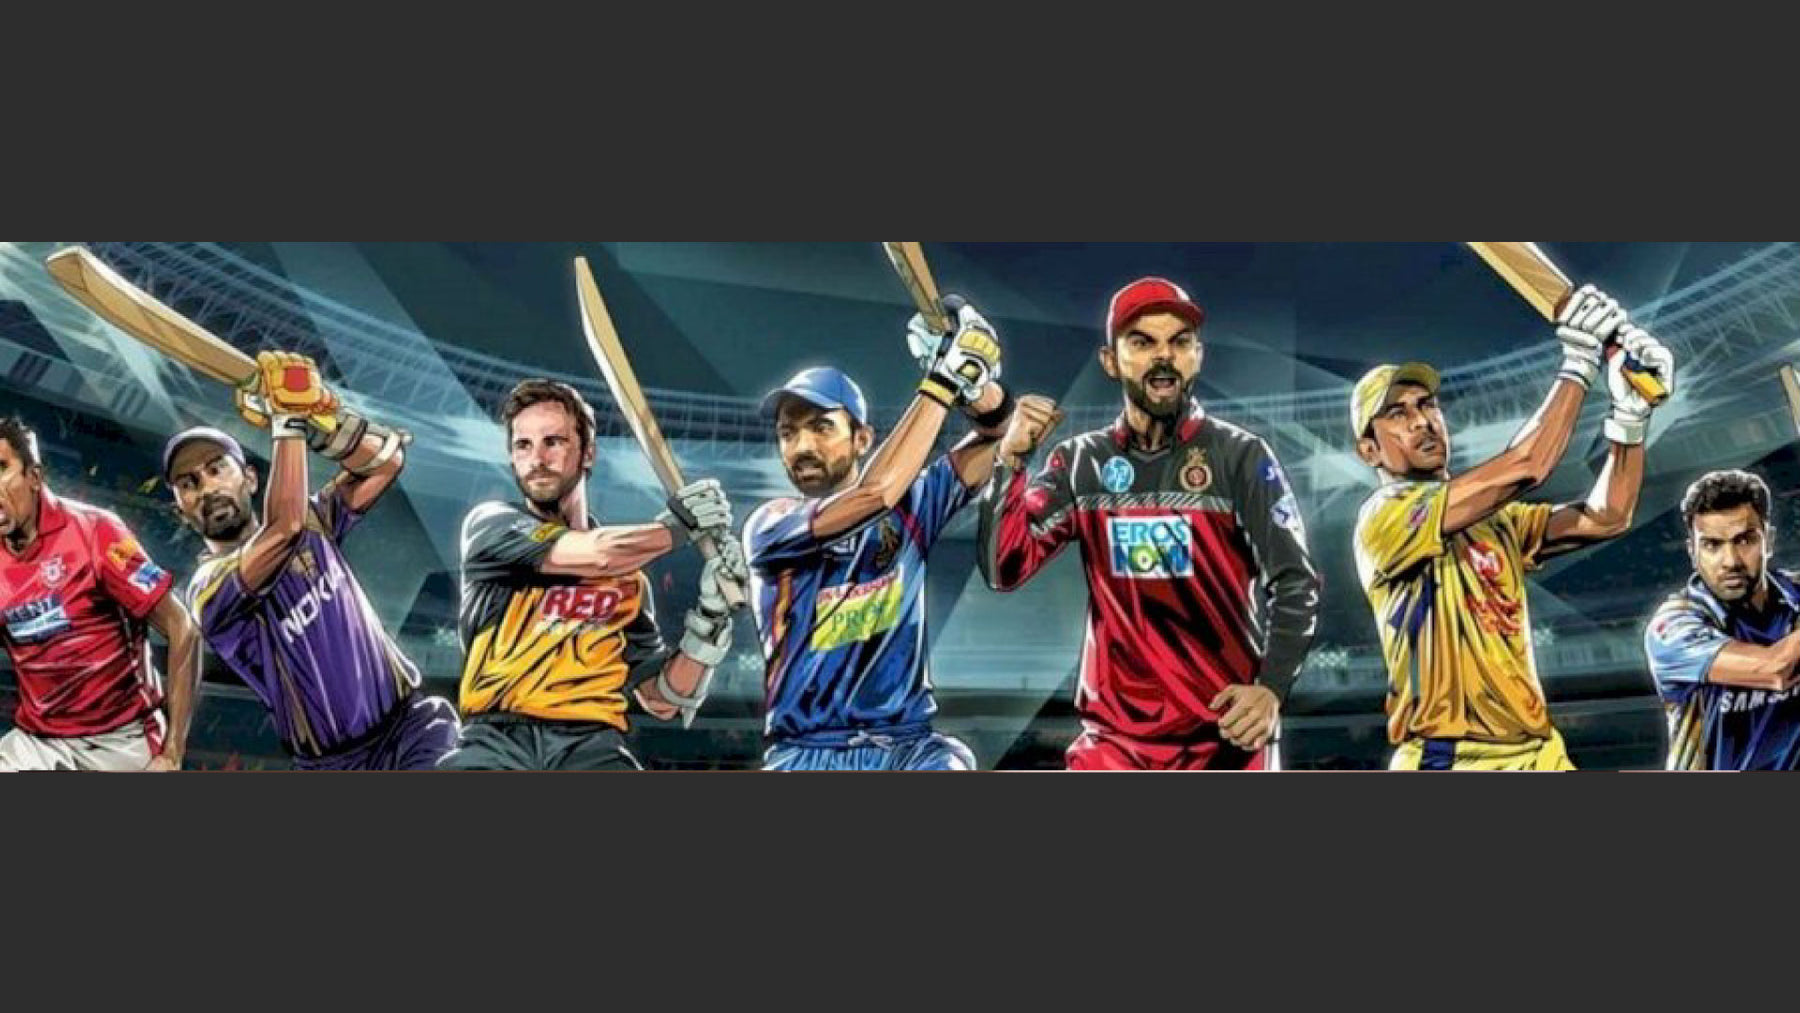 5 REASONS TO WATCH IPL 2020 ON A BIG SCREEN.